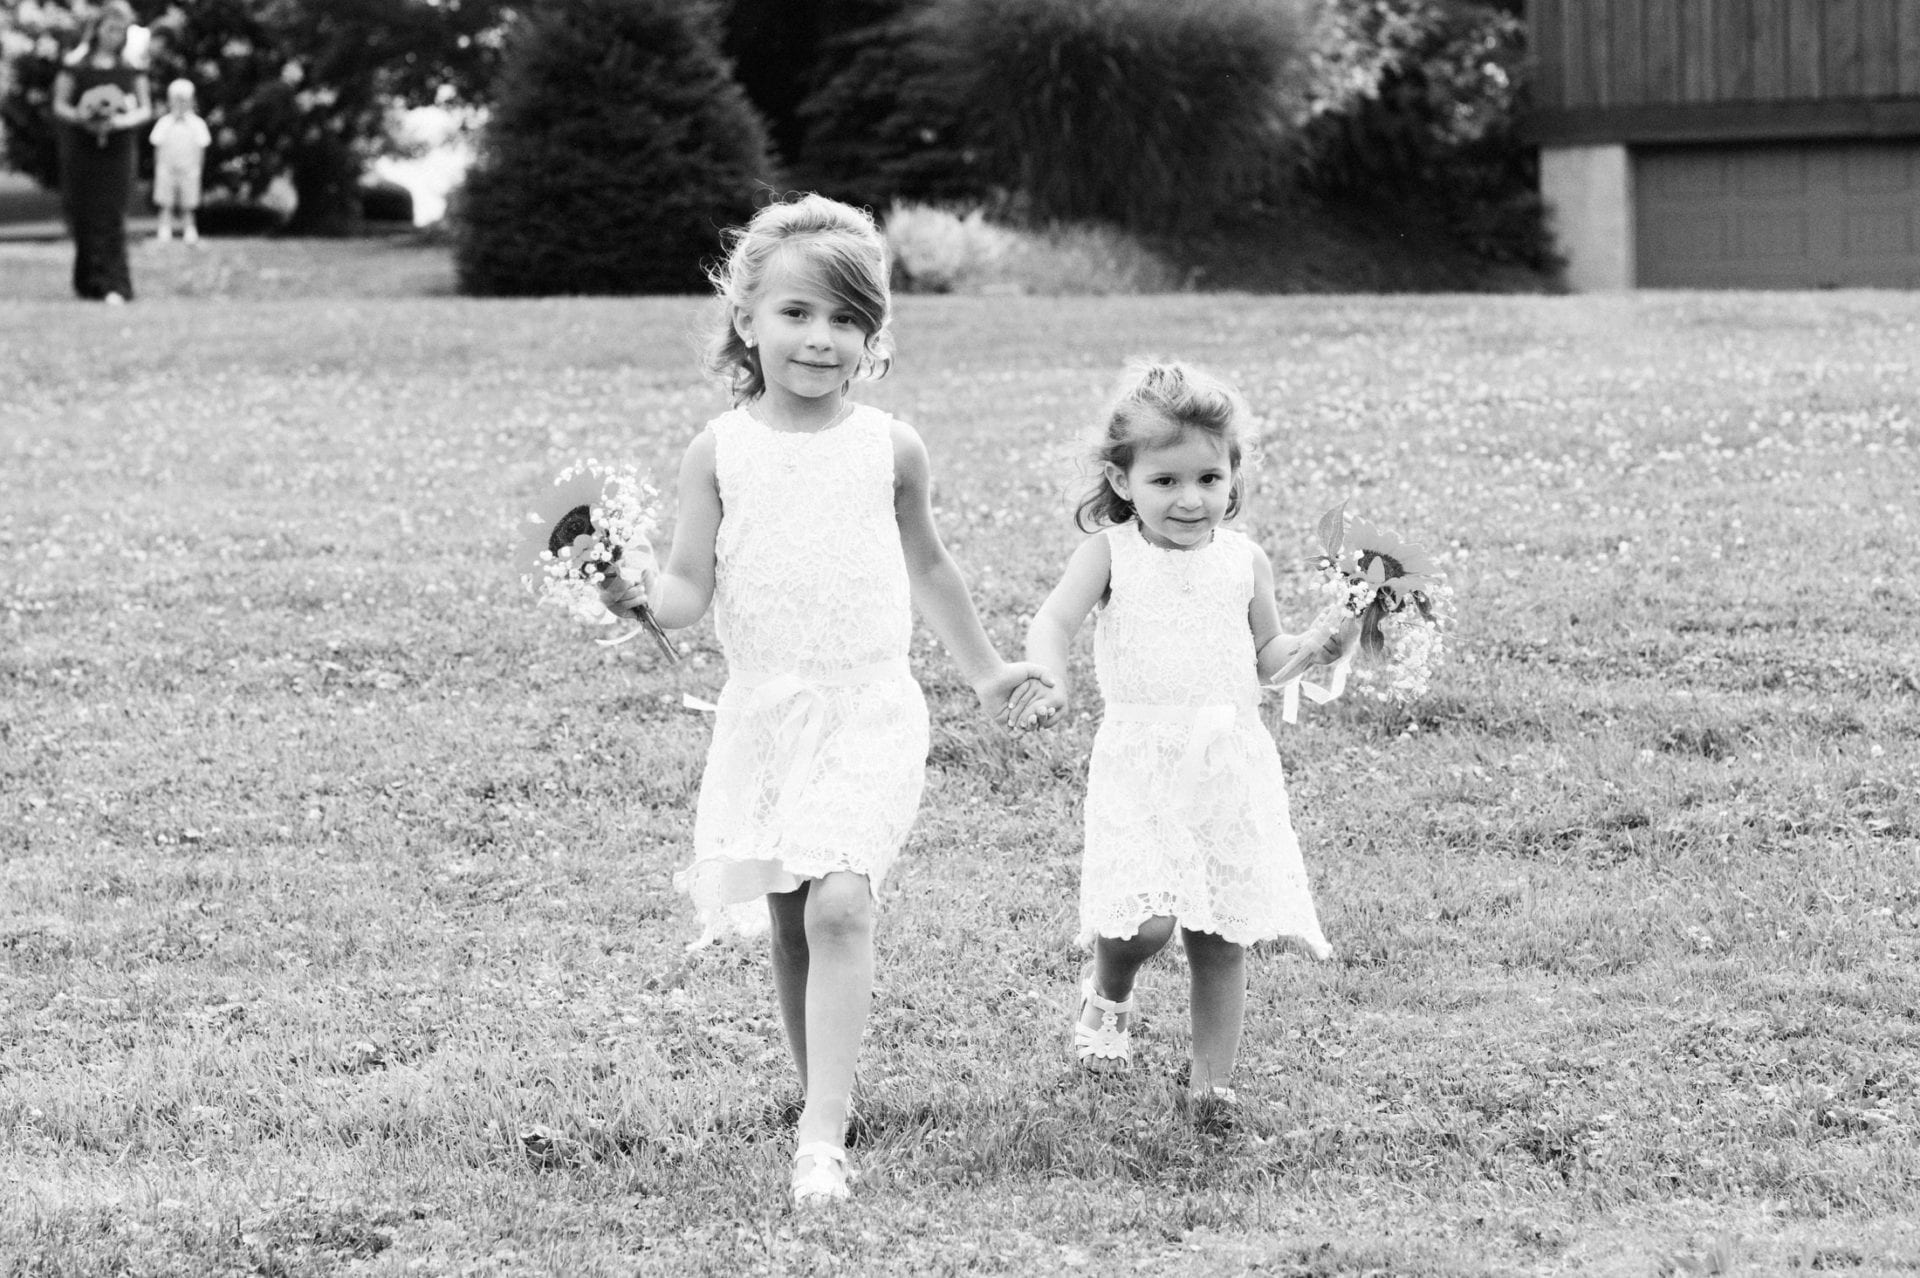 two young girls hold hands as they walk through a field while carrying flowers. Armstrong Farms Weddings